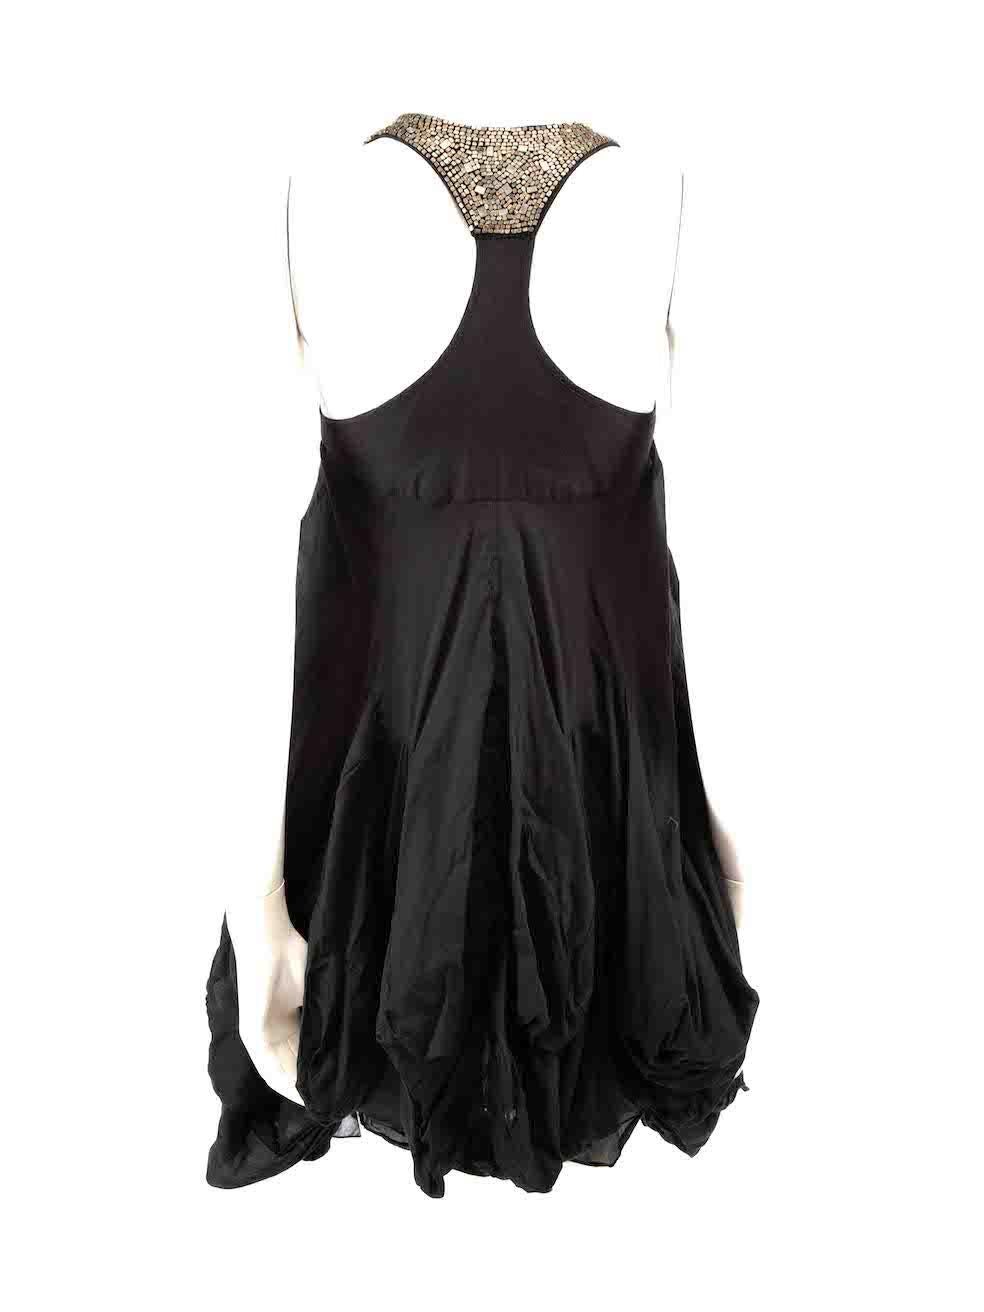 All Saints Black Embellished Neck Puffball Dress Size S In Good Condition For Sale In London, GB